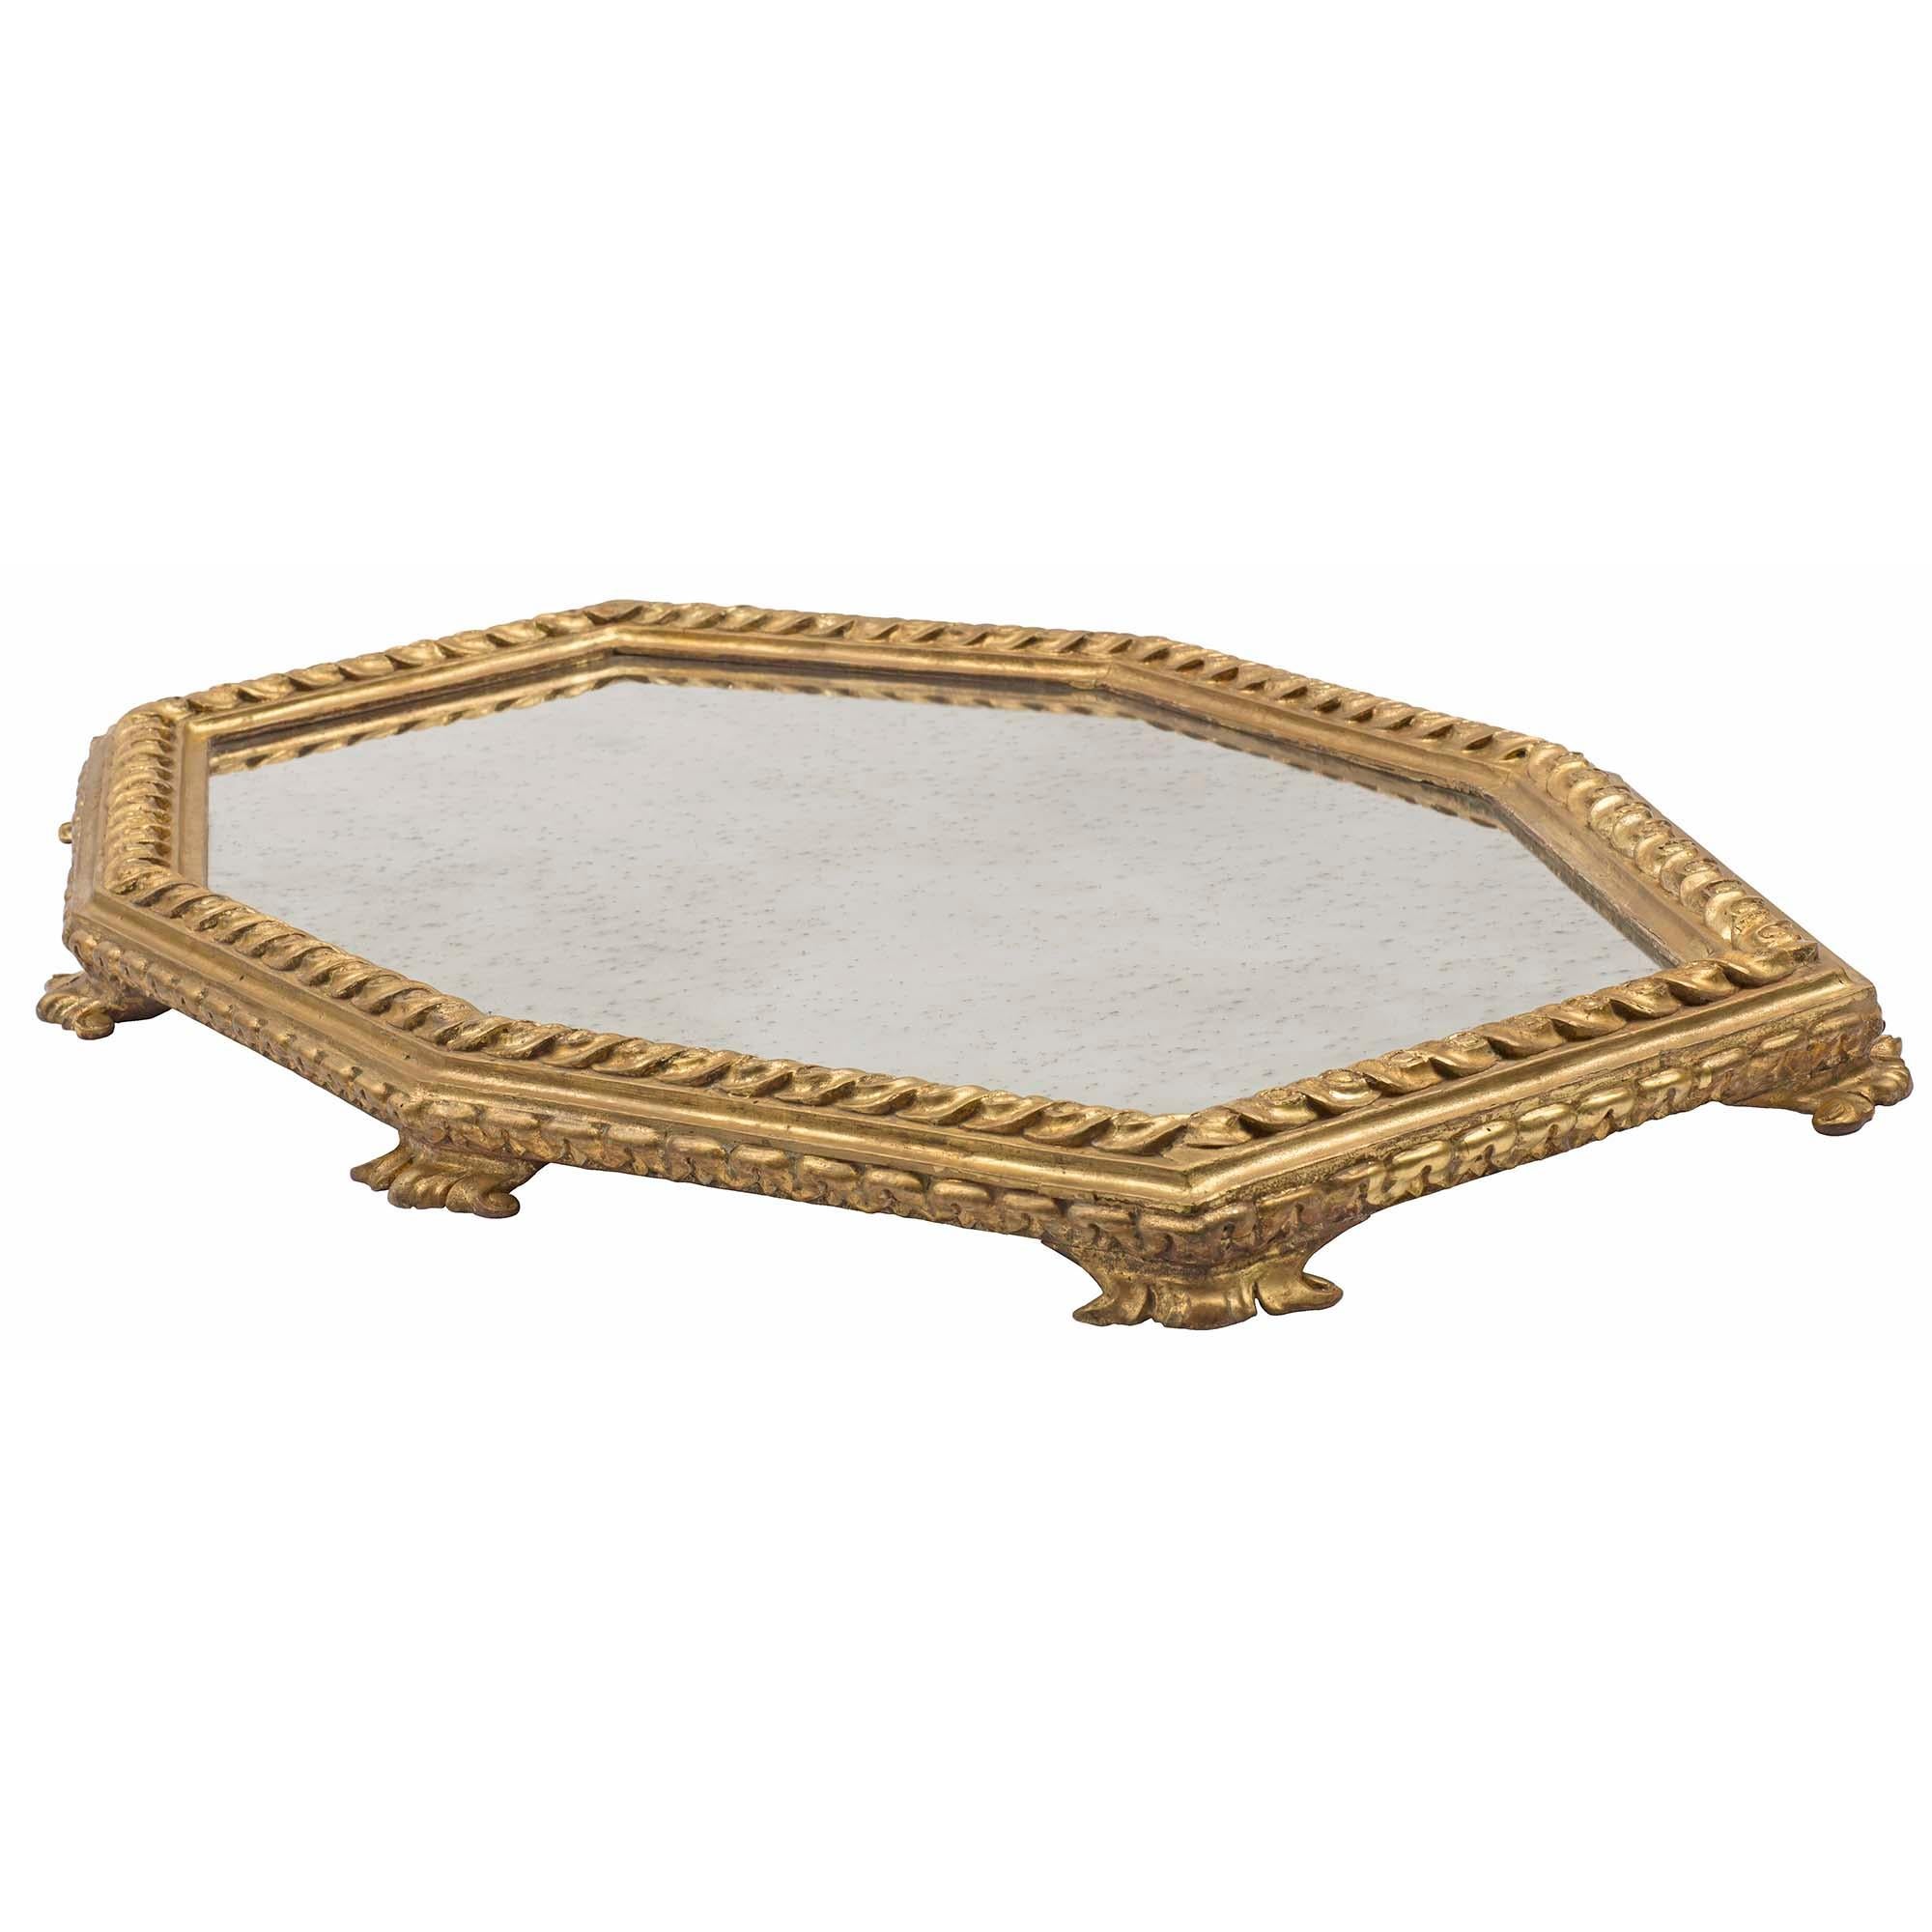 Italian 18th Century Louis XVI Period Giltwood Centerpiece In Good Condition For Sale In West Palm Beach, FL